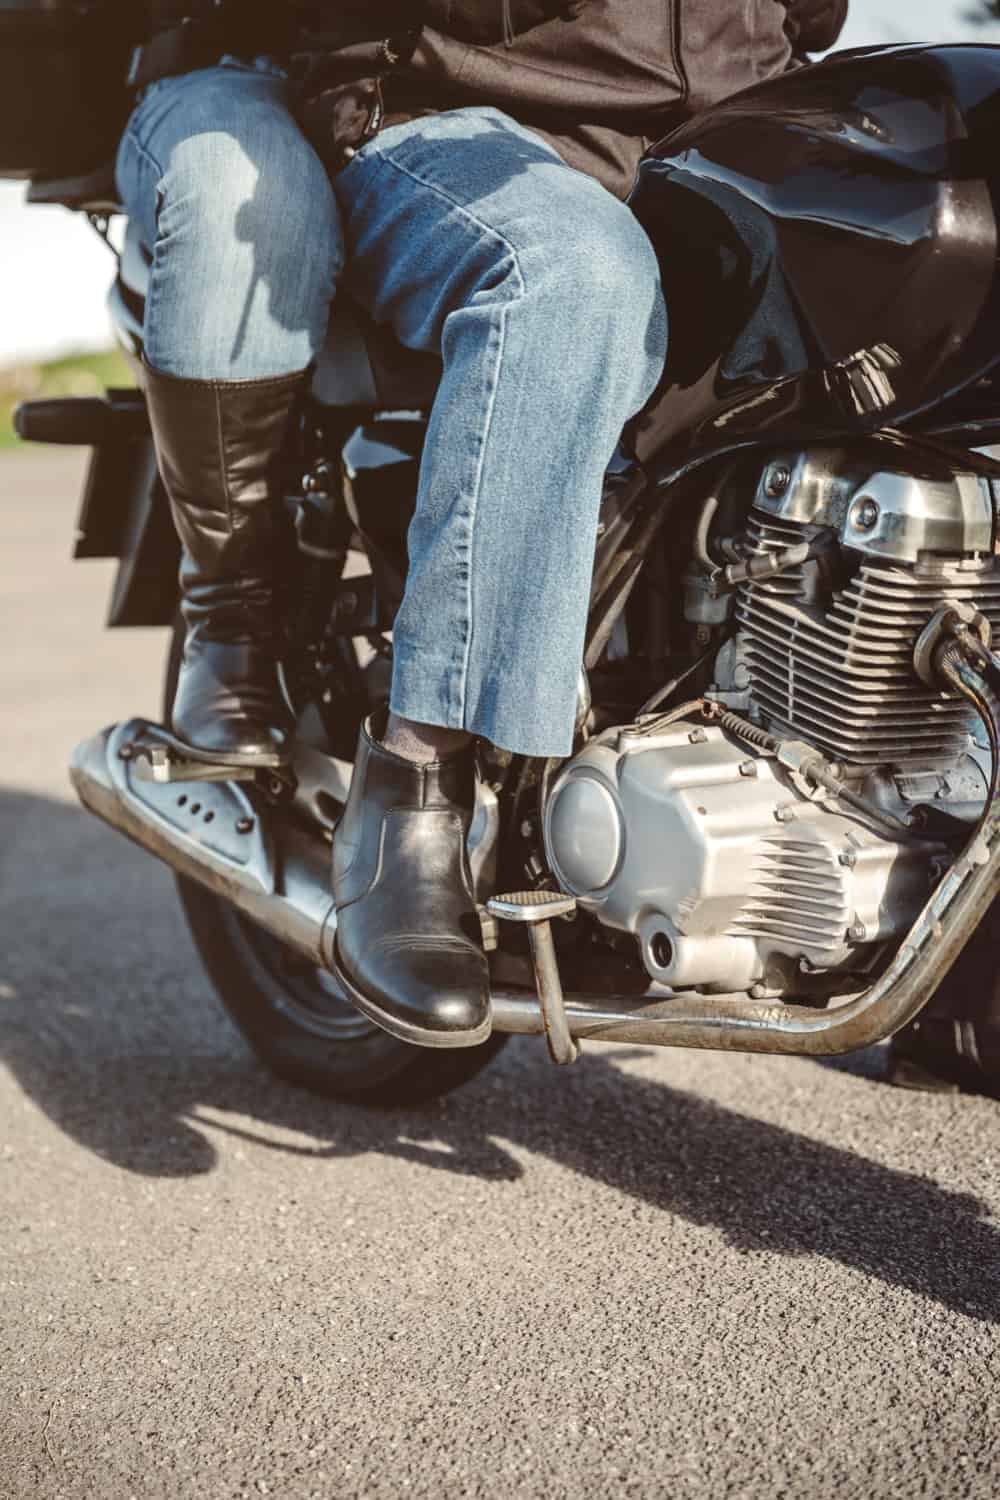 The Ultimate Sizing Guide for Buying Motorcycle Boots